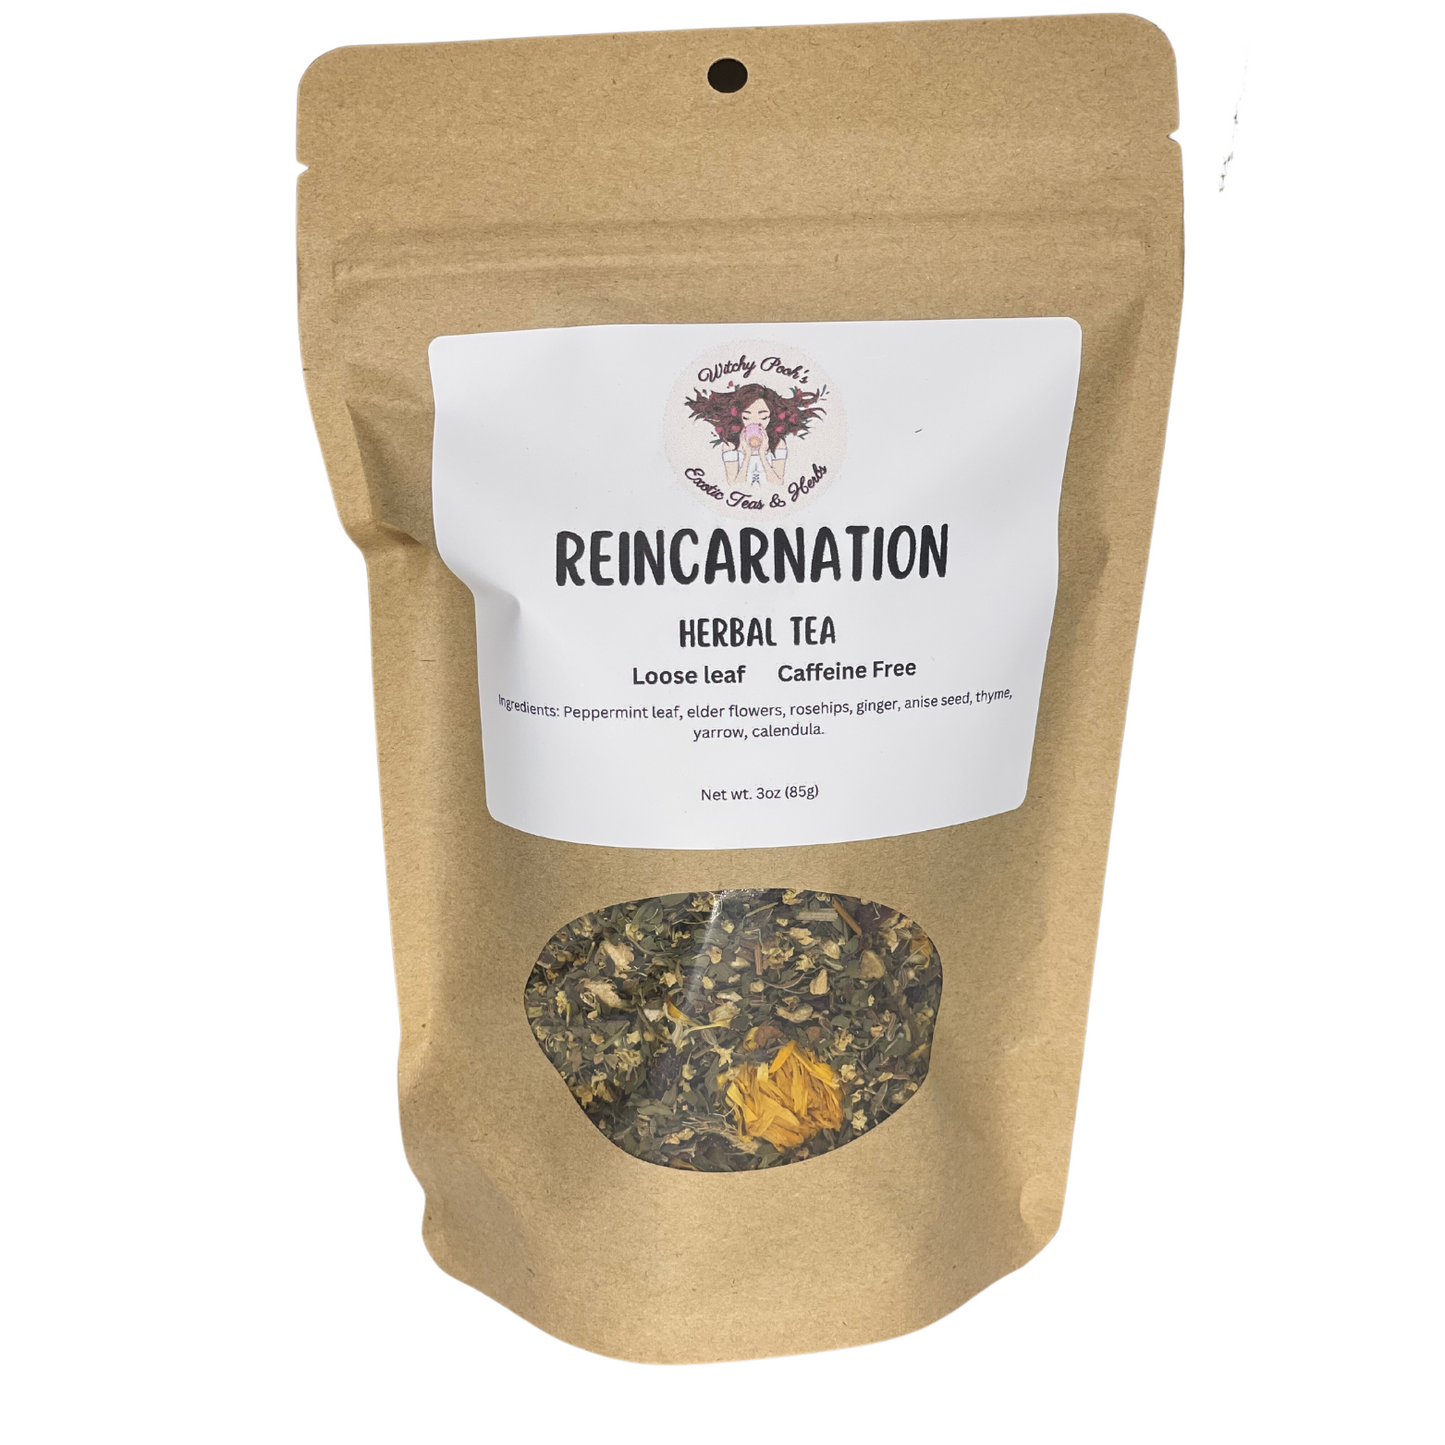 Reincarnation Loose Leaf Functional Herbal Tea, Caffeine Free, For Cold and Flu Relief, Immune Boost